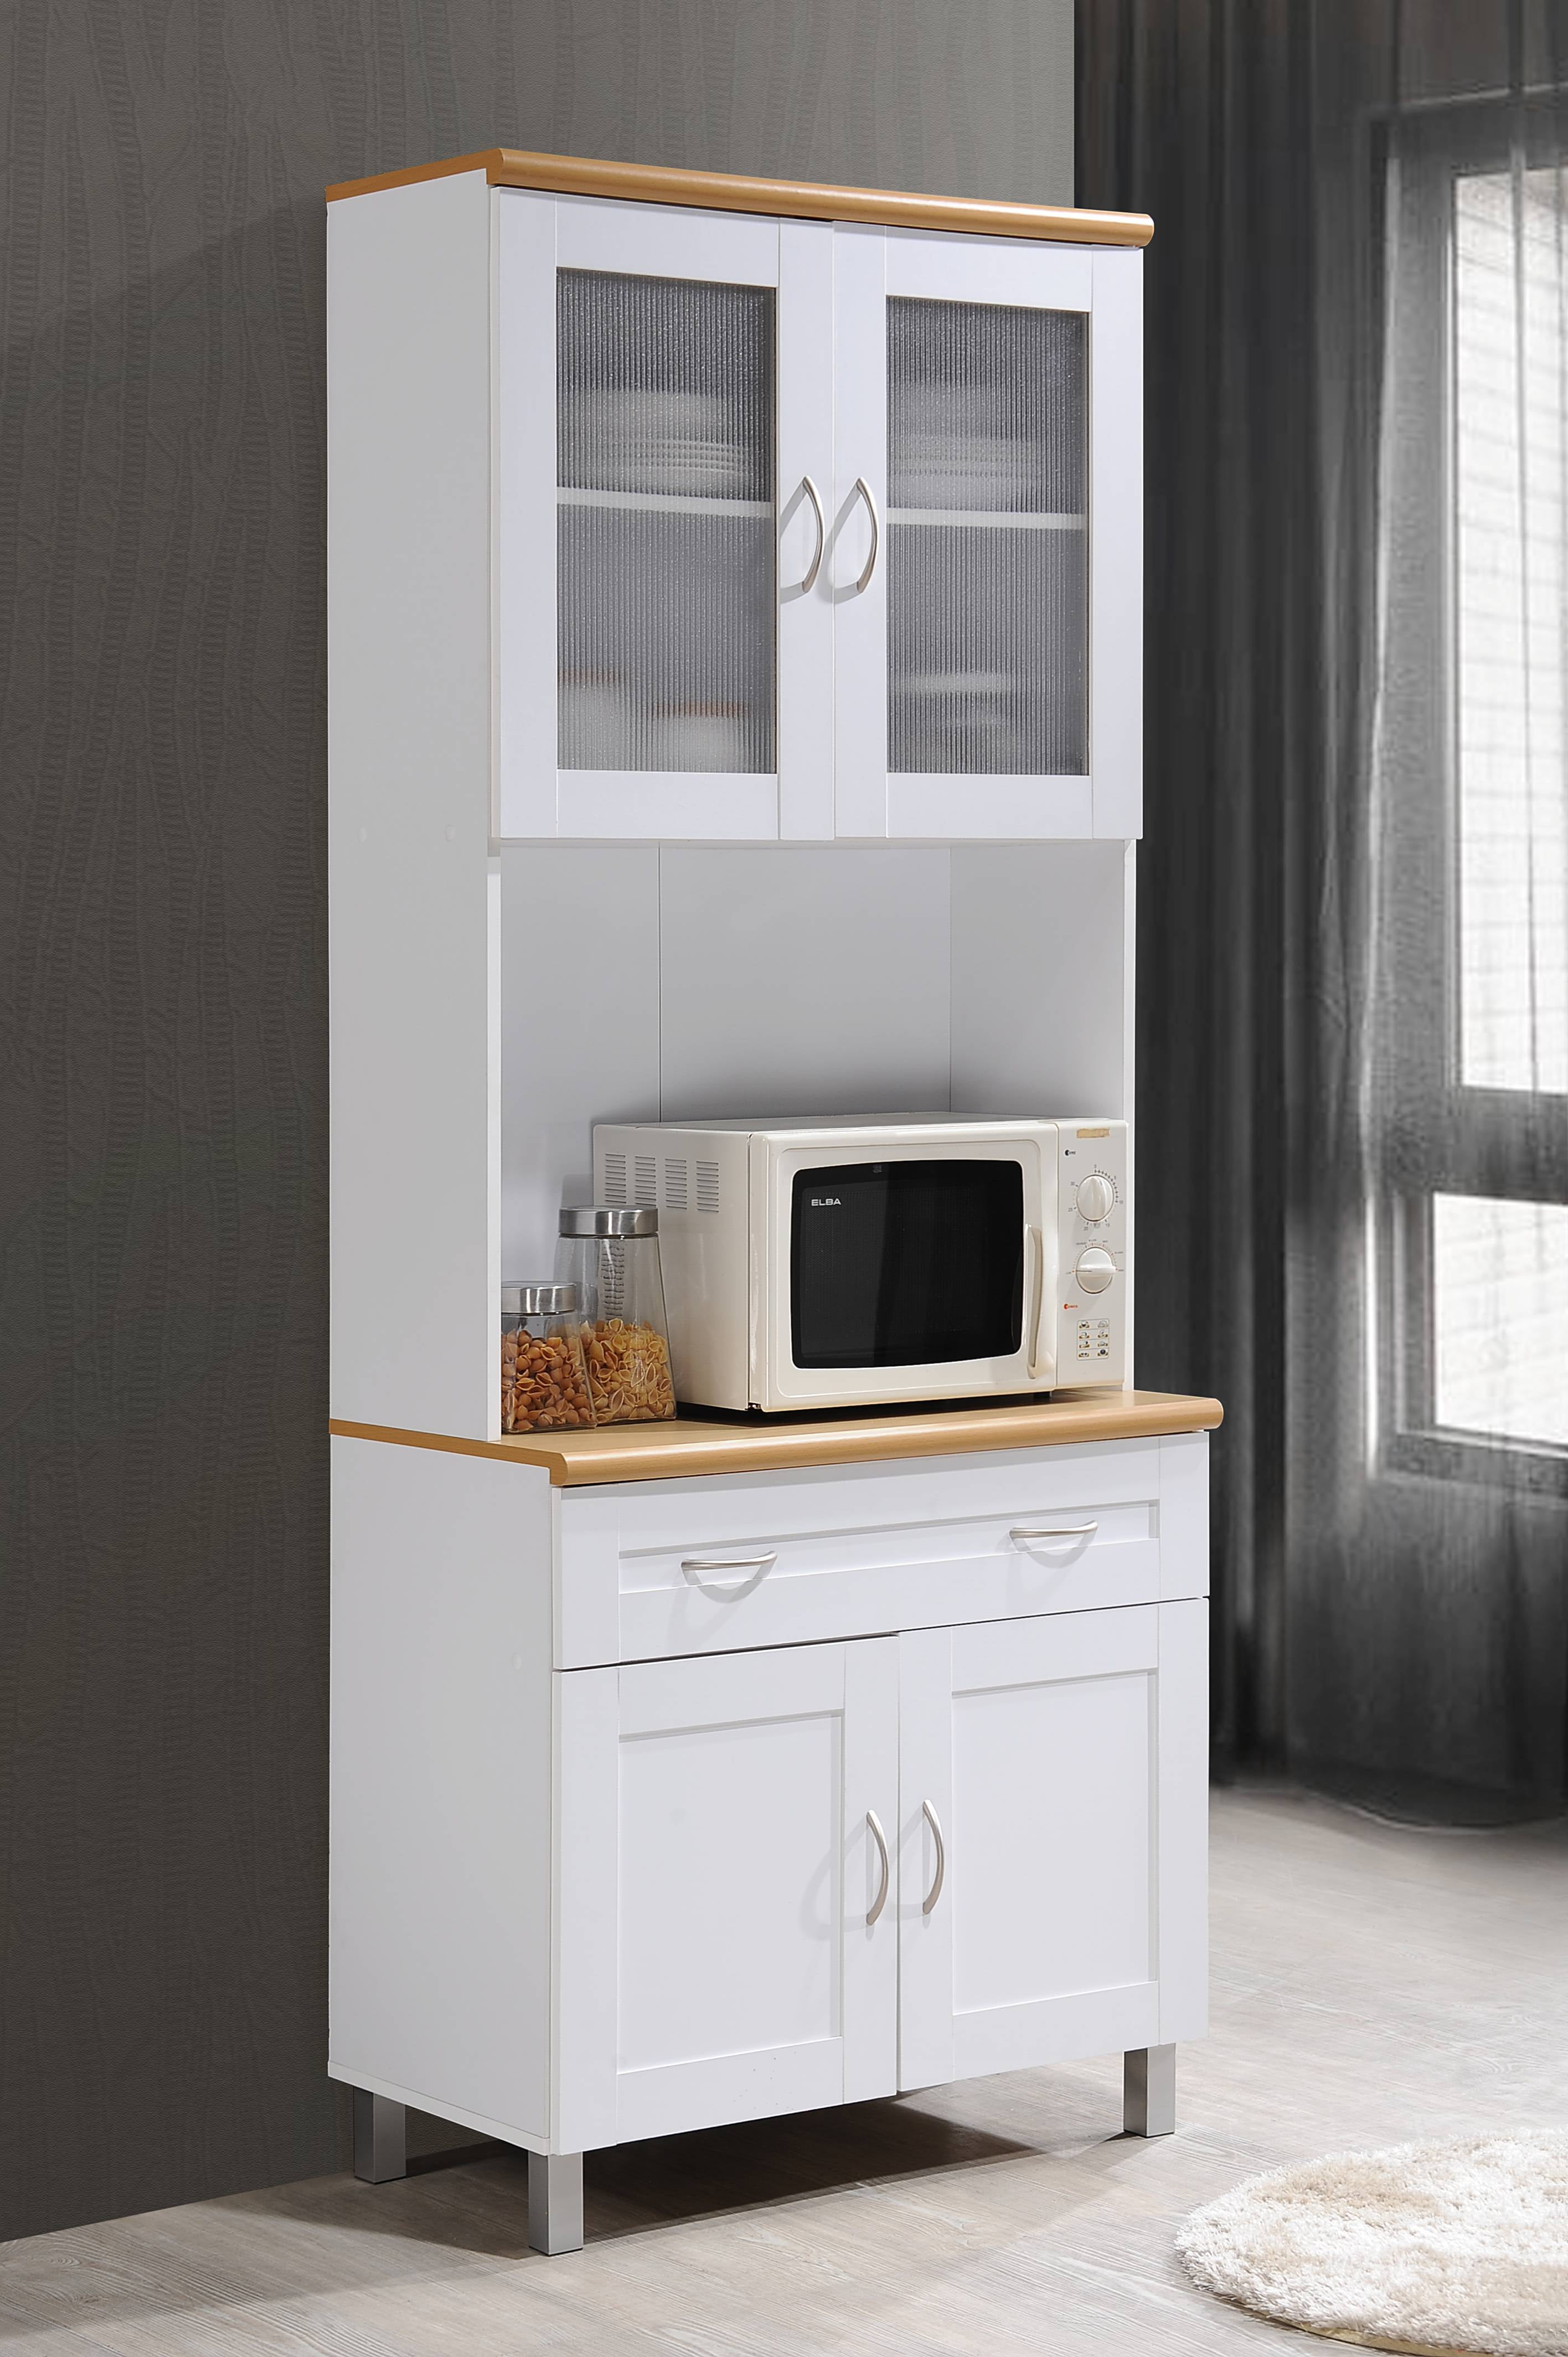 Details about   Hodedah Freestanding Kitchen Storage Cabinet w/ Open Space for Microwave White 